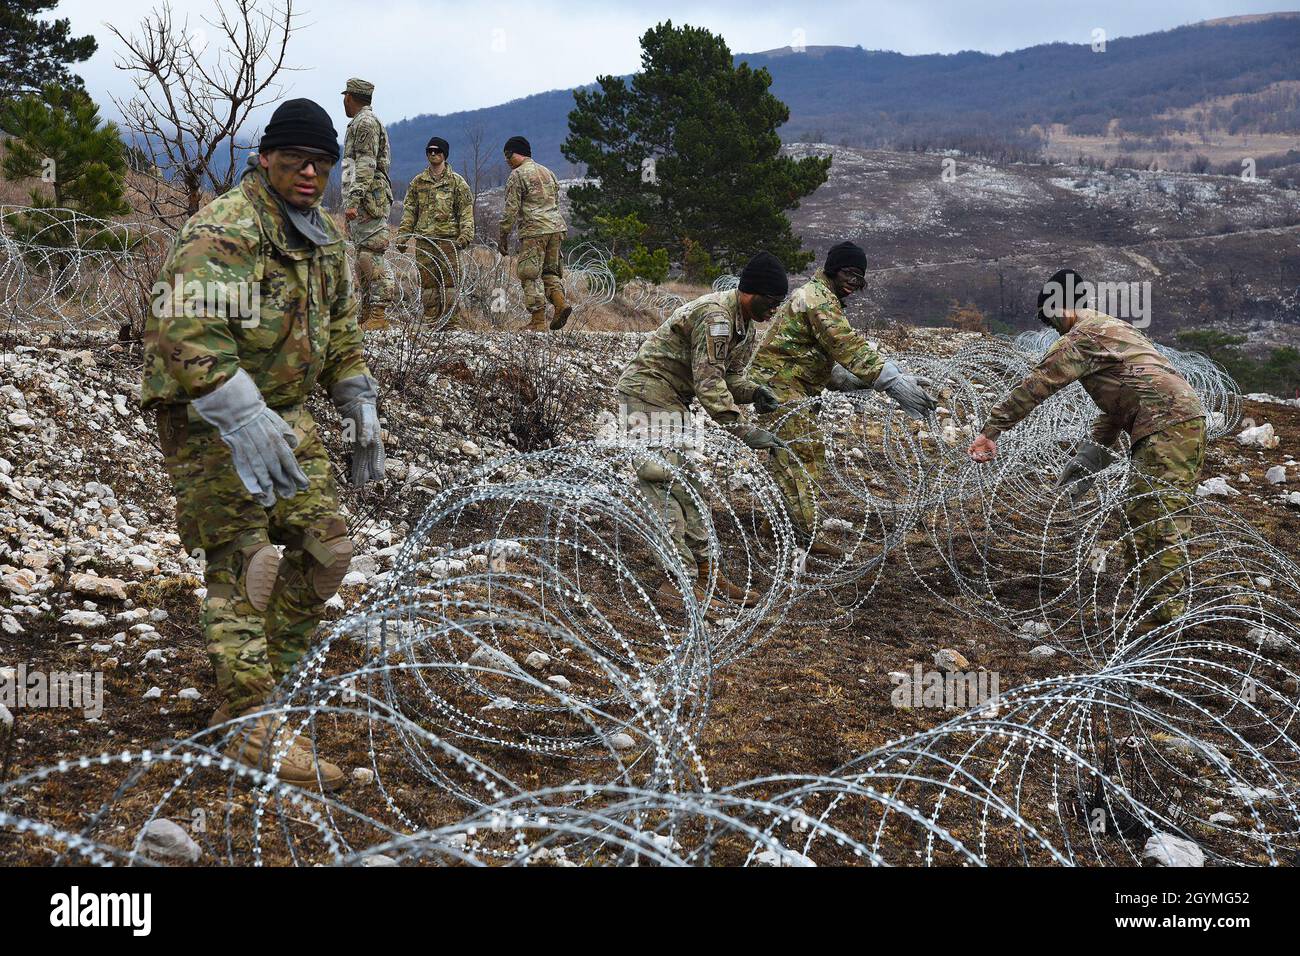 U.S. Army Paratroopers assigned to the 173rd Brigade Support Battalion, 173rd Airborne Brigade, lay out barbed wire during Exercise Lipizzaner VI at Pocek Range in Postonja, Slovenia, Feb. 02, 2020. Lipizzaner is a combined squad-level training exercise in preparation for platoon evaluation, and to validate battalion-level deployment procedures. The 173rd Airborne Brigade is the U.S. Army Contingency Response Force in Europe, capable of projecting ready forces anywhere in the U.S. European, Africa or Central Commands' areas of responsibility. (U.S. Army photo by Paolo Bovo) Stock Photo